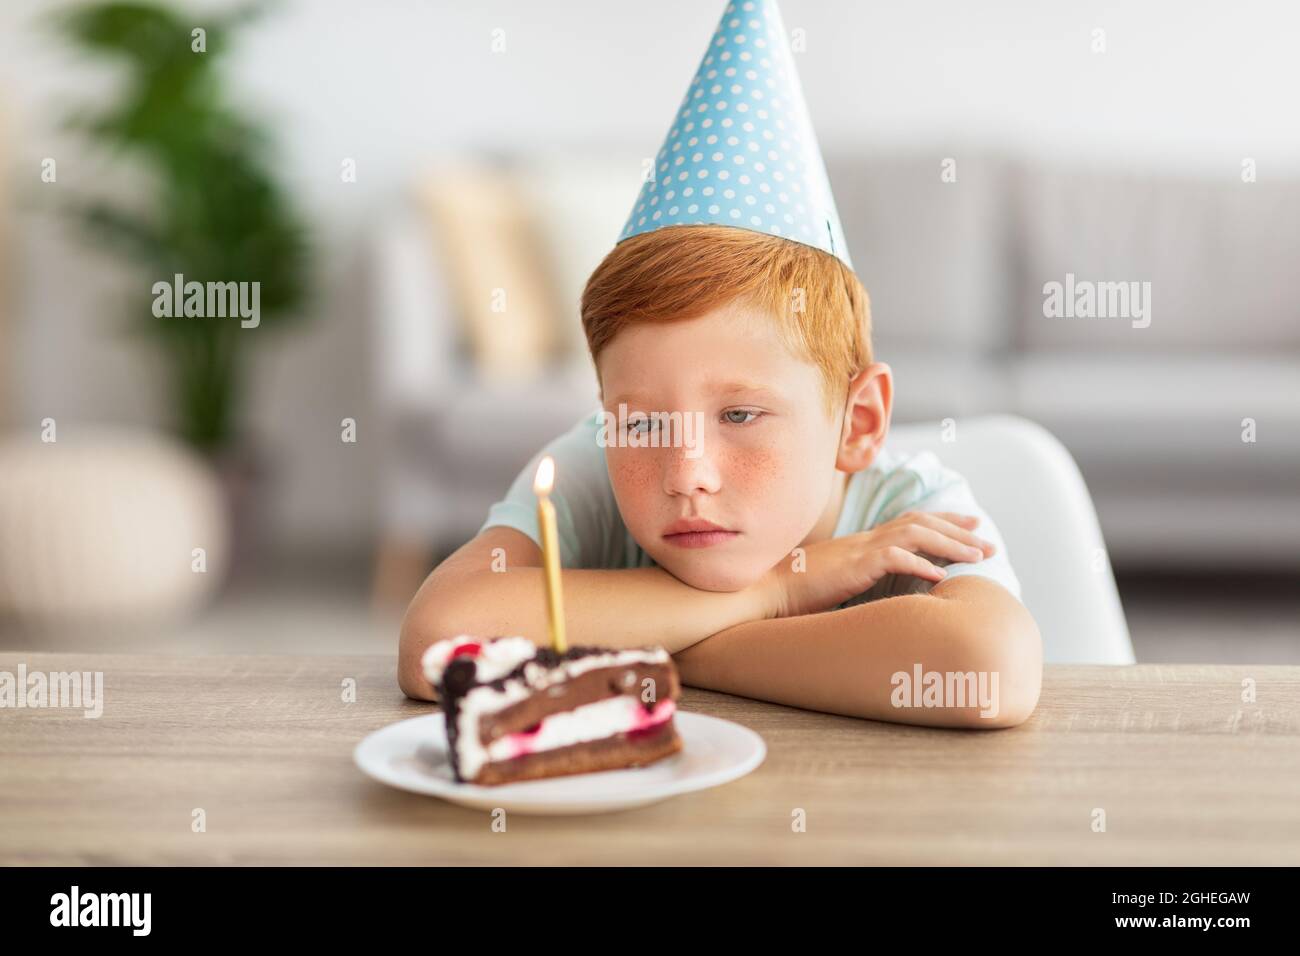 Upset birthday boy looking at lid candle on his cake Stock Photo